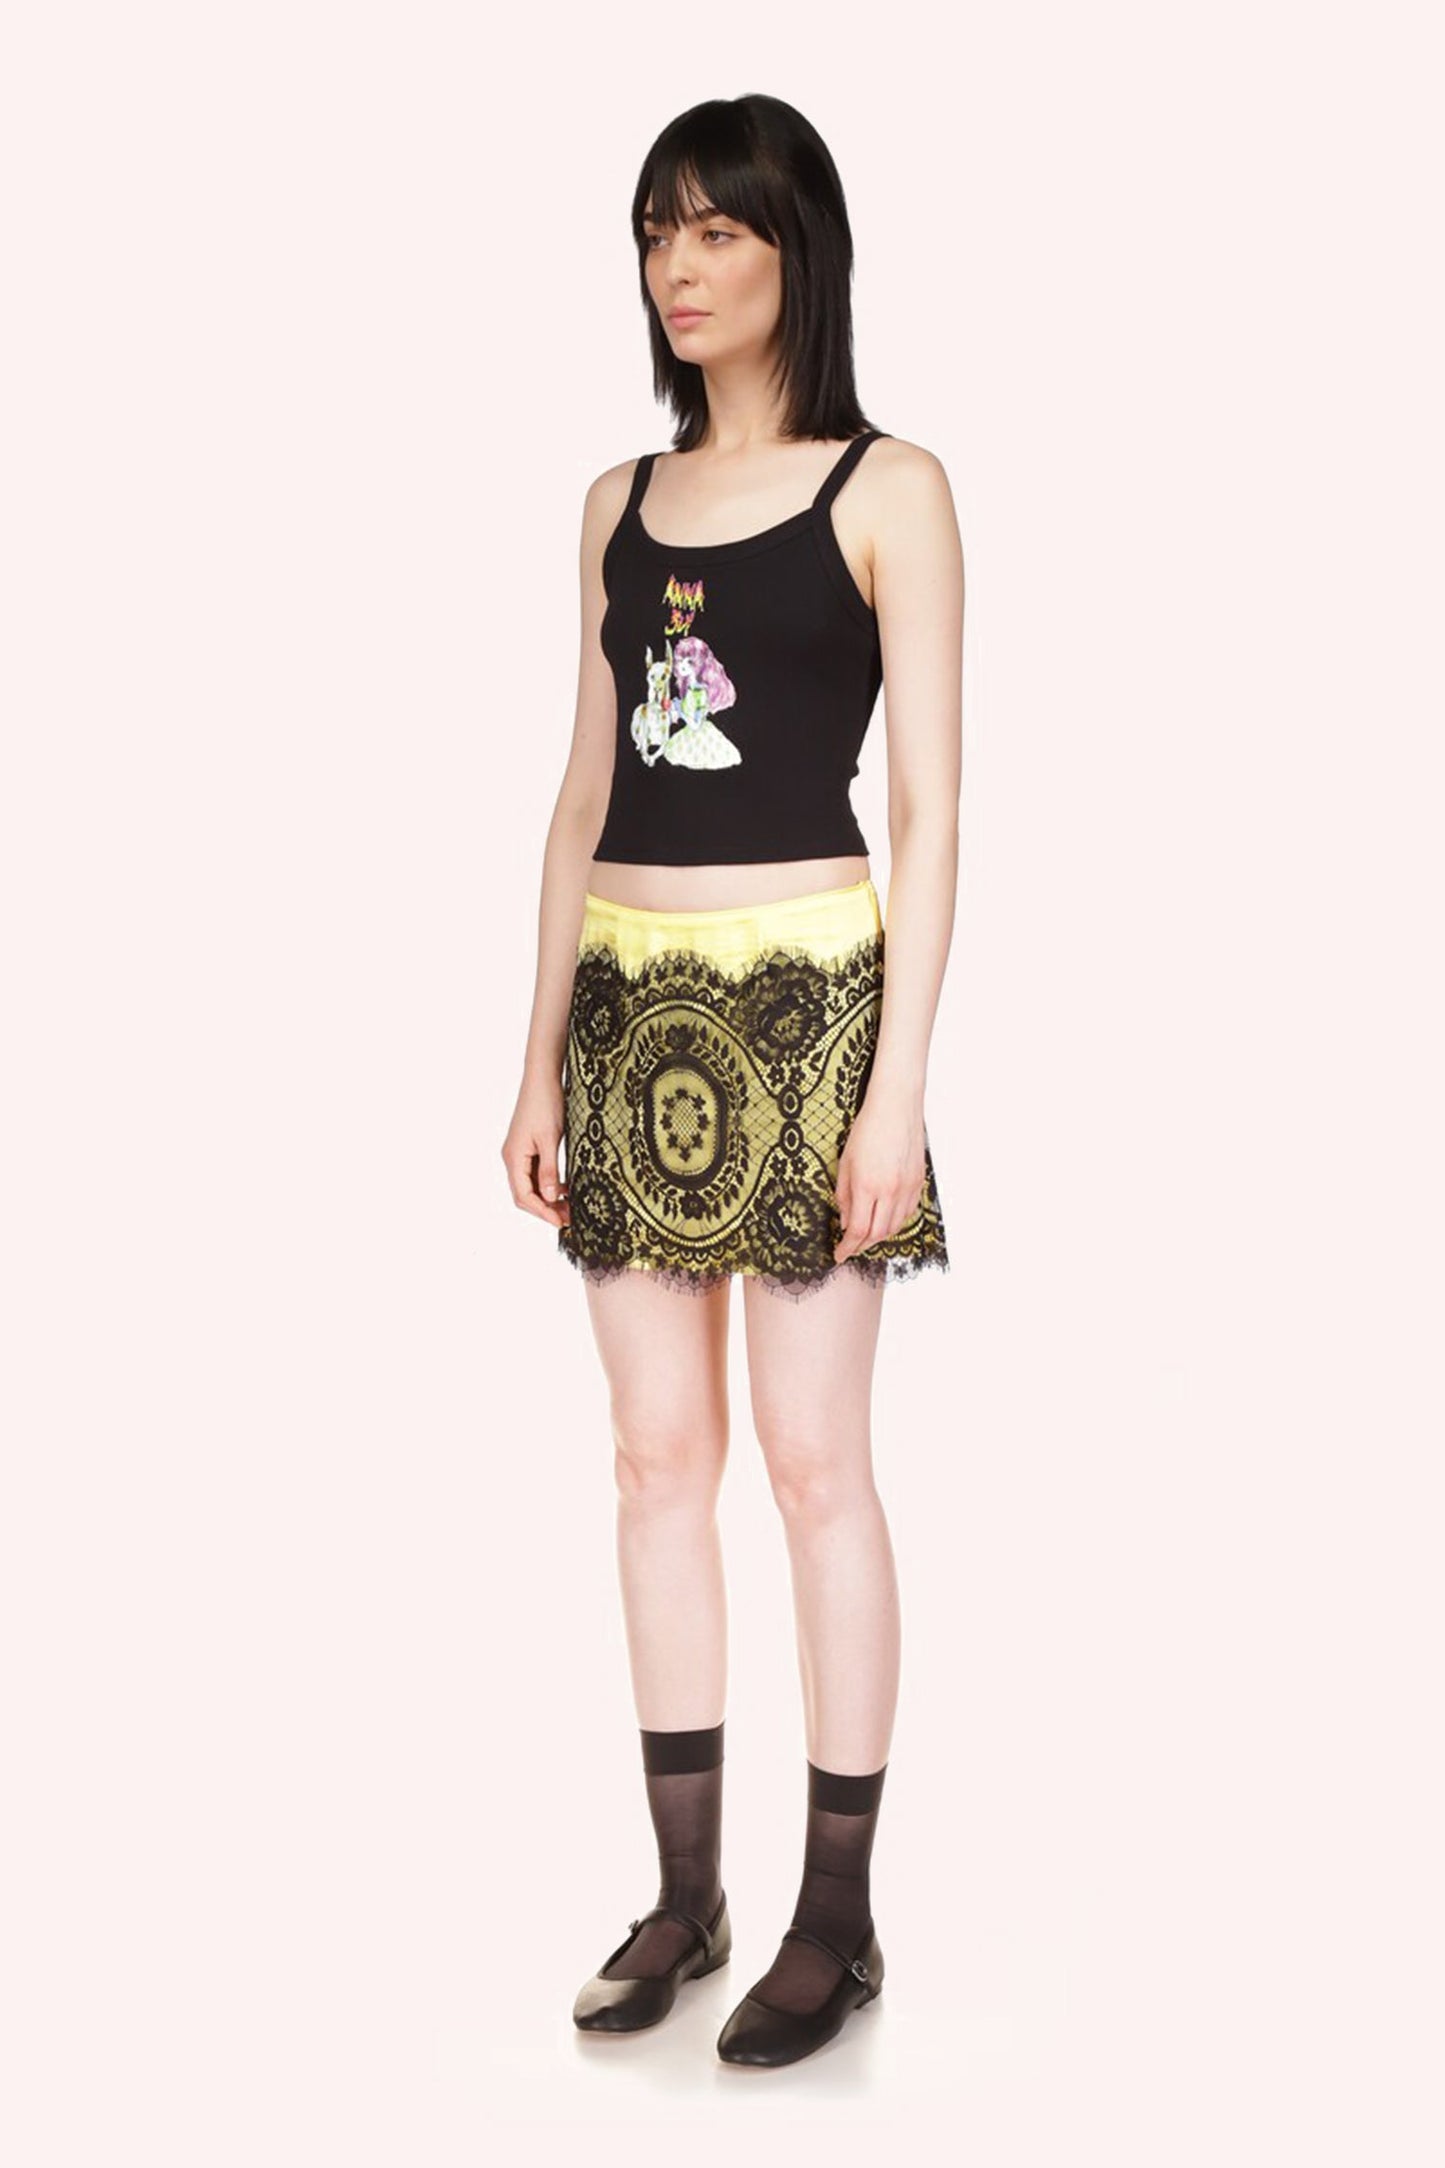 Micro Ribbed Scoop Tank Black, sleeveless, 2 black straps, just above the hips, Anna Sui print in front